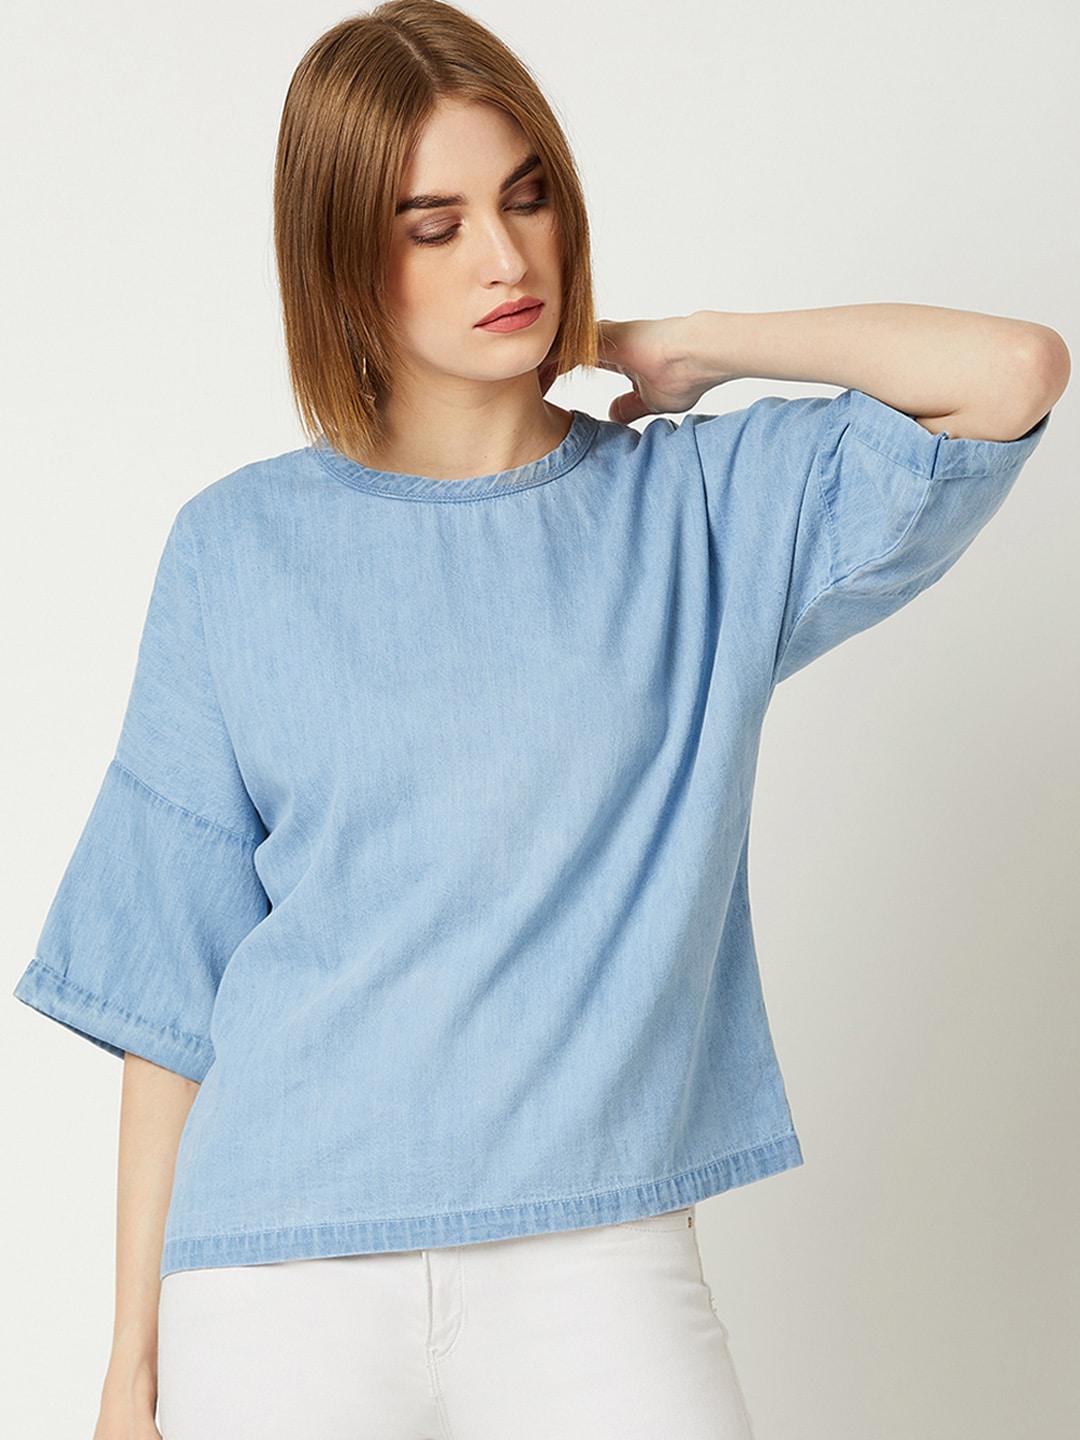 miss-chase-women-blue-solid-denim-boxy-top